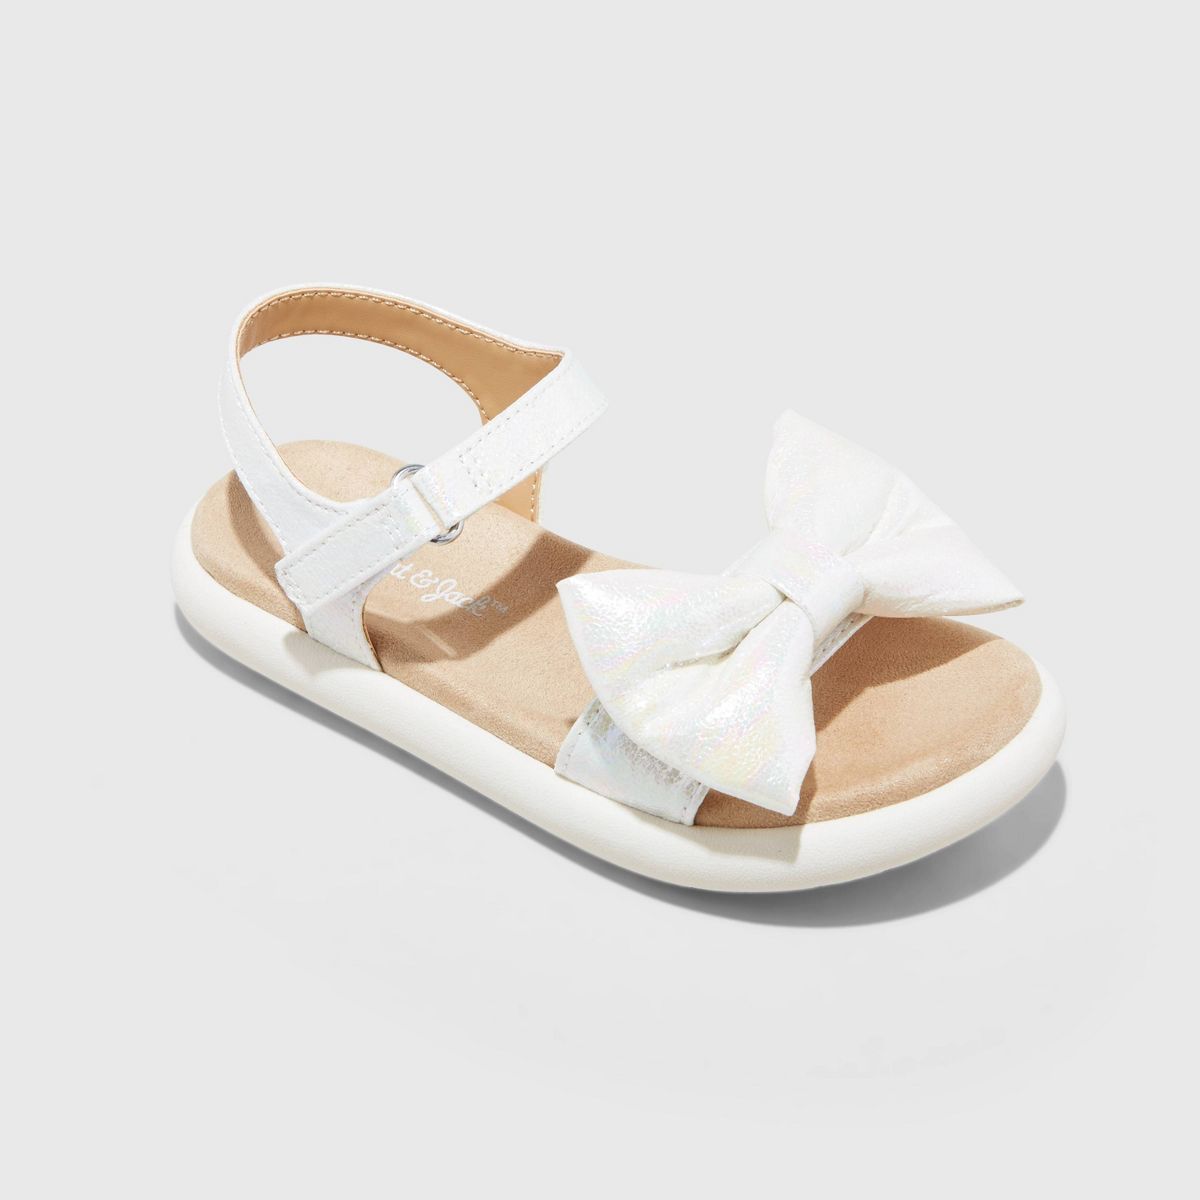 Toddler Babs Bow Sandals - Cat & Jack™ White 7T | Target